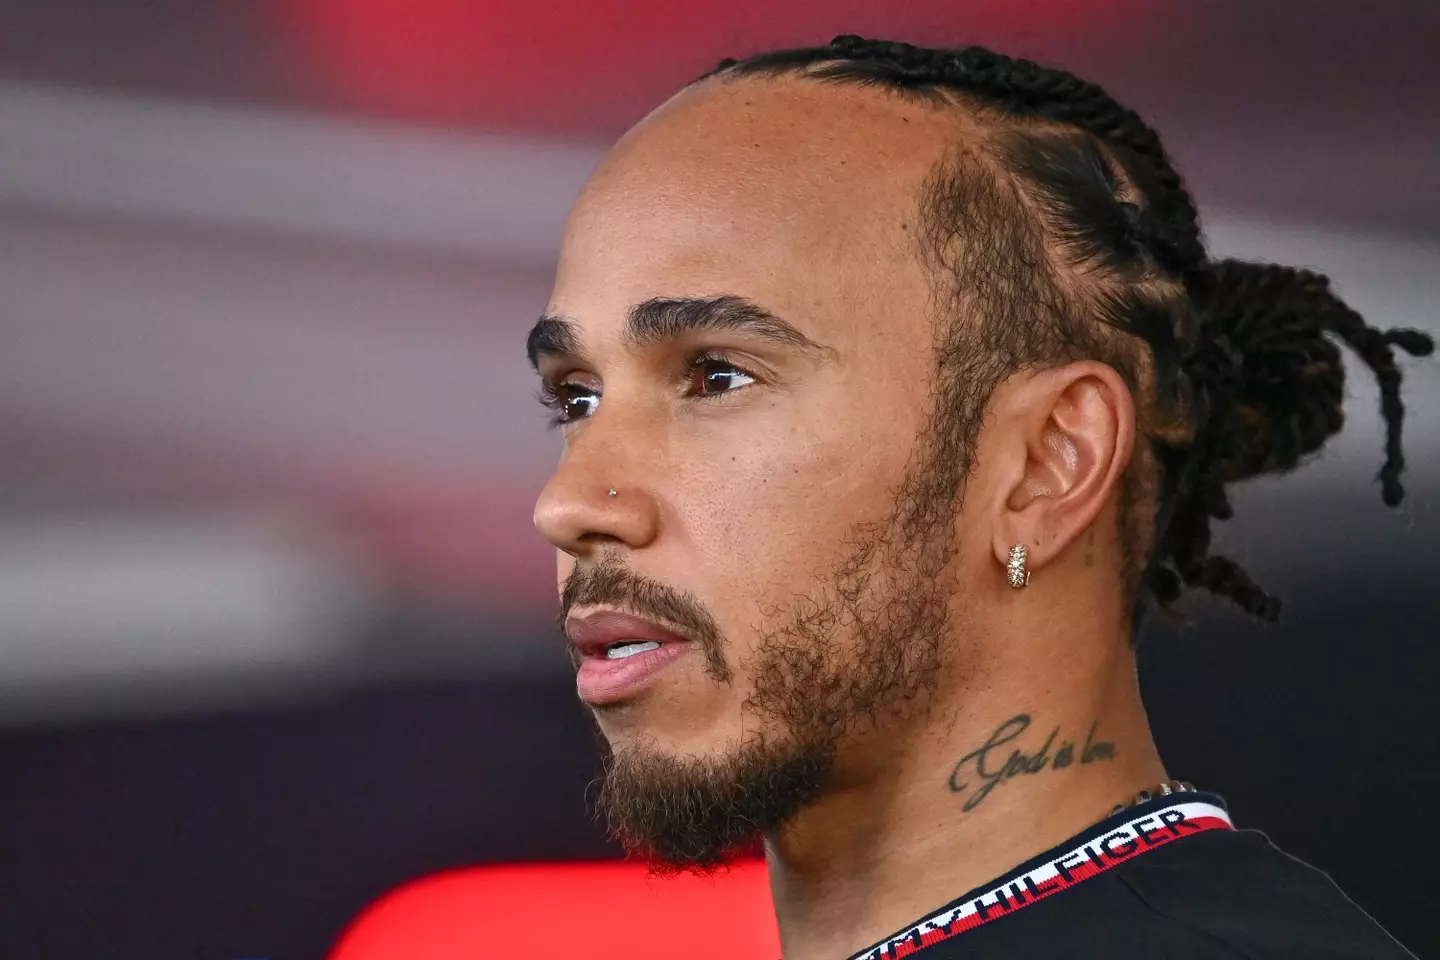 Lewis Hamilton will leave Mercedes at the end of the season (Getty)